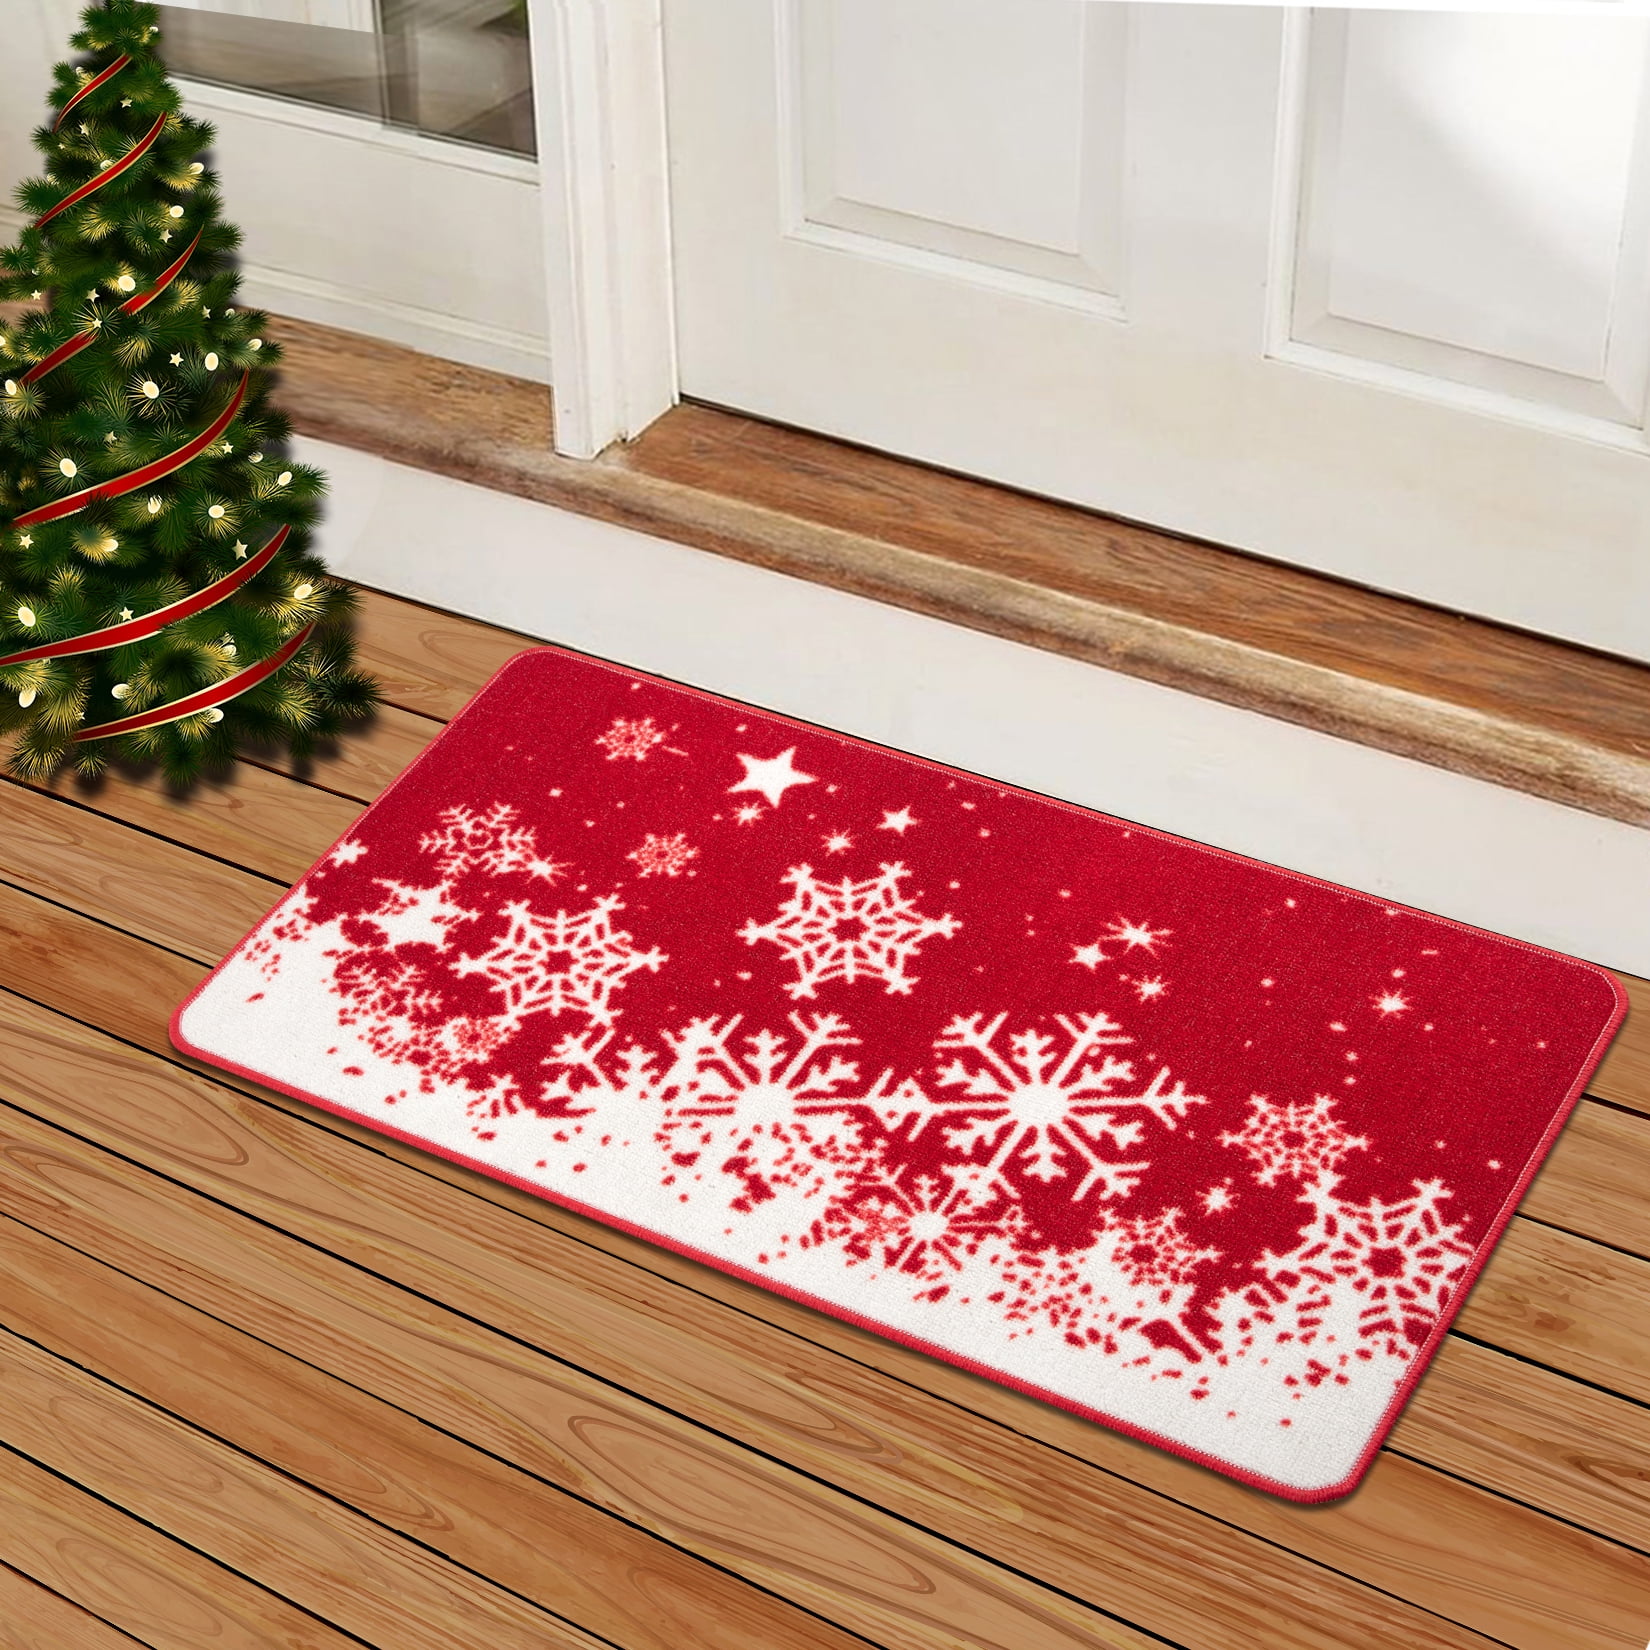 Christmas Black Tree Doormat Winter Cold Forest Snowflake Xmas